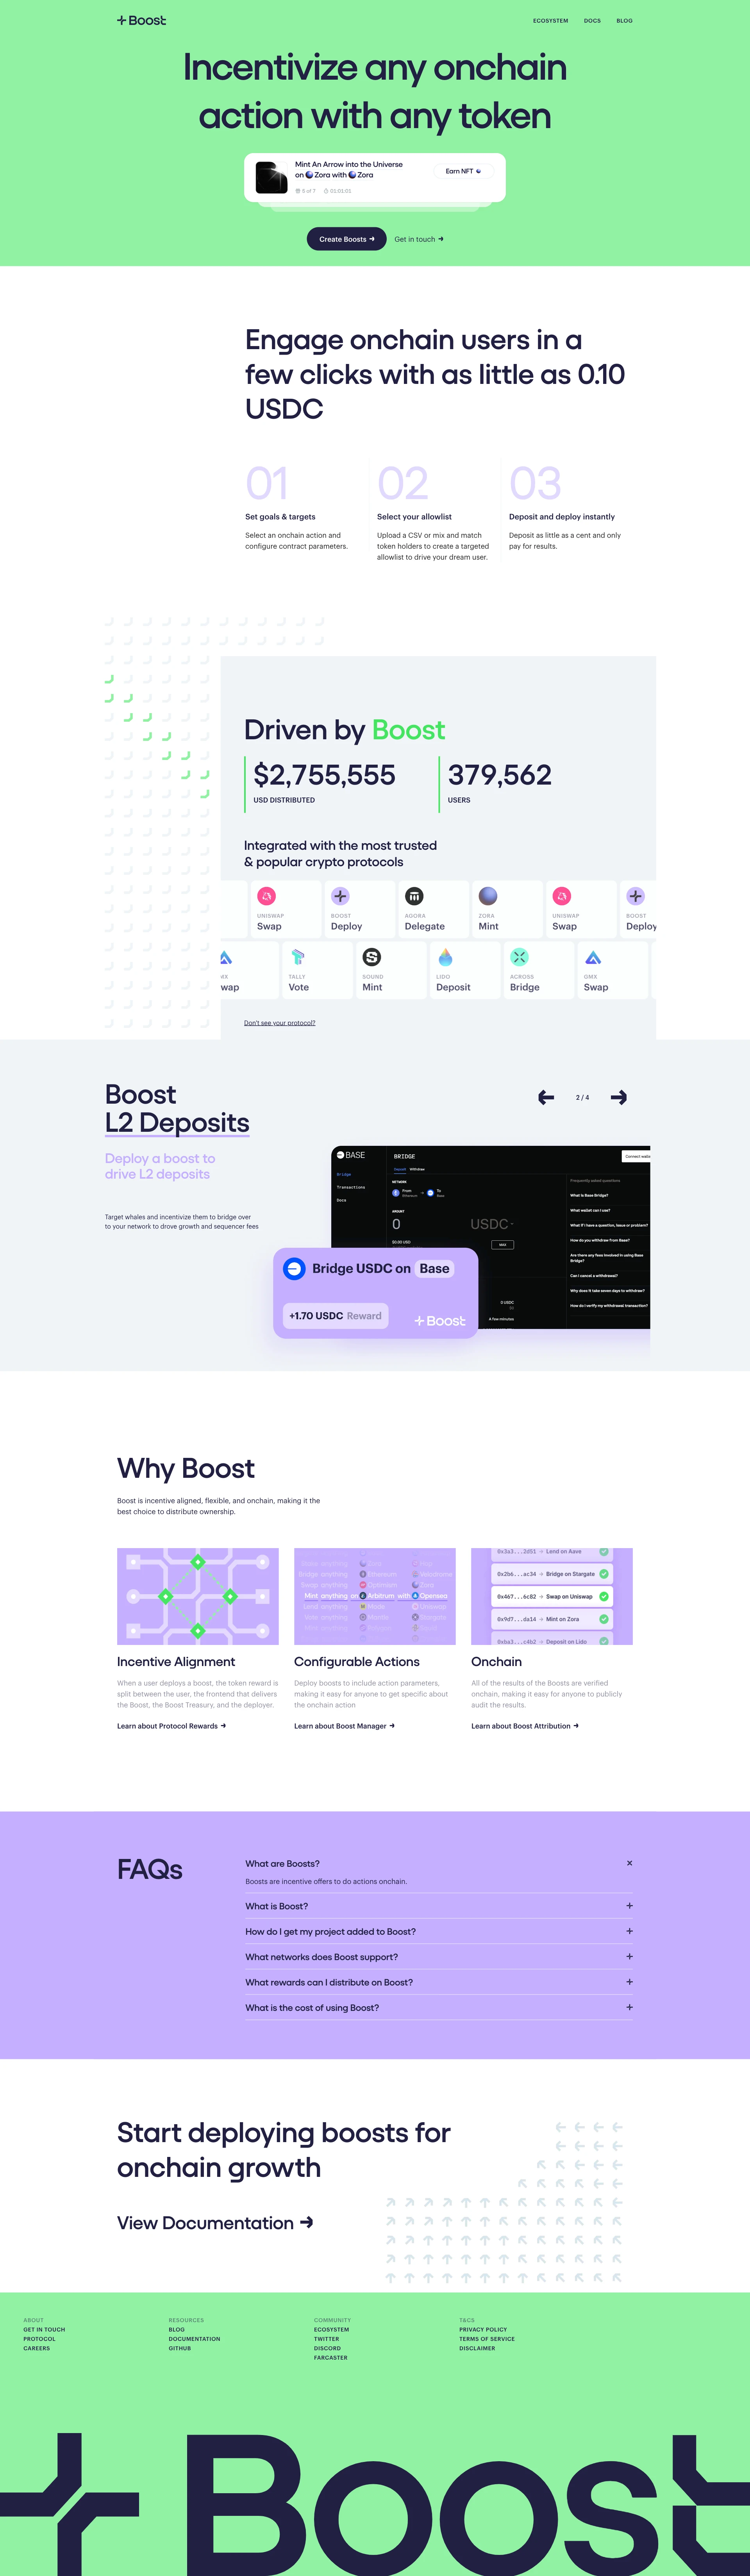 Boost Landing Page Example: Boost is a protocol that allows anyone to deploy targeted incentive offers to any wallet for performing onchain actions on Ethereum.